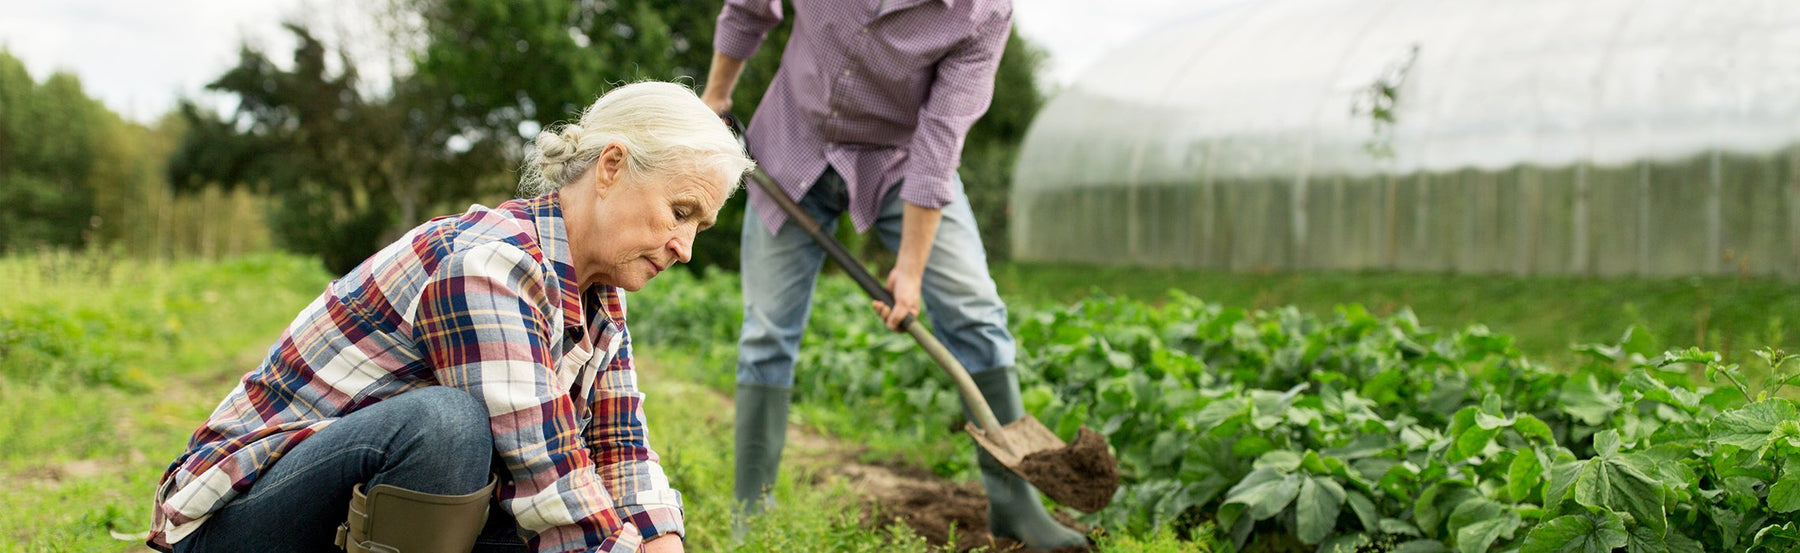 How to Prevent Gardening Injuries